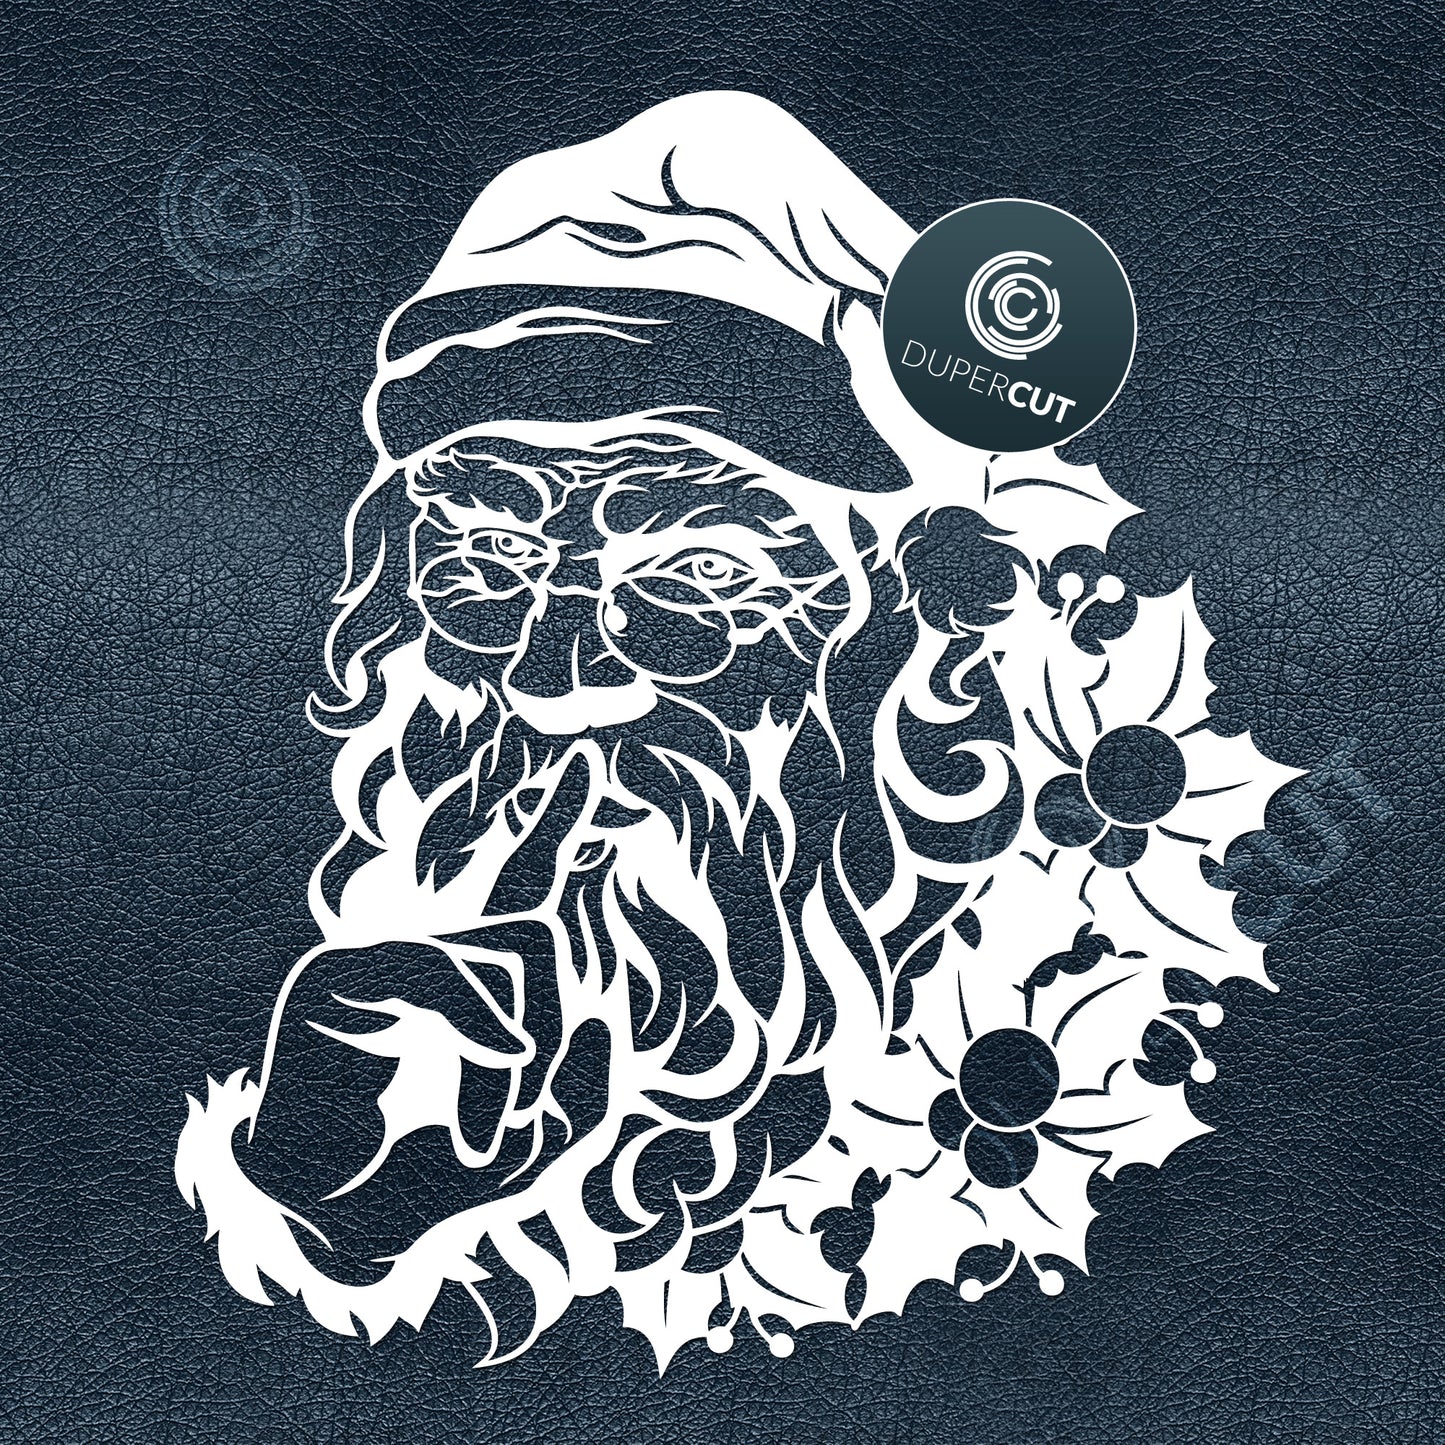 Shushing Santa Claus, custom stencil illustration. SVG PNG DXF cutting files for Cricut, Silhouette, Glowforge, print on demand, sublimation templates